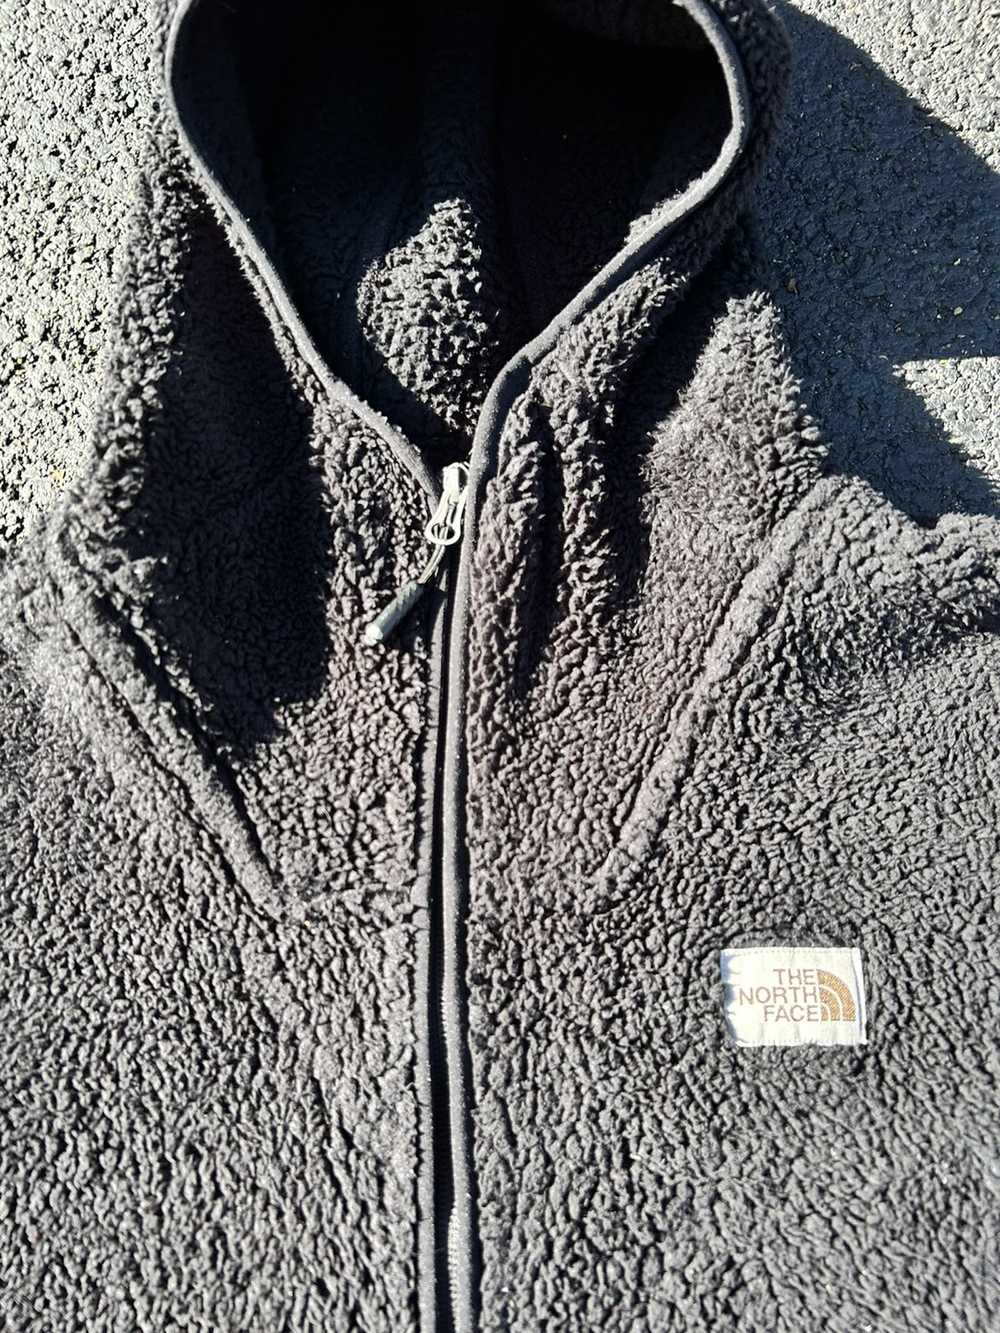 The North Face The North Face Sherpa Fleece hoodie - image 3